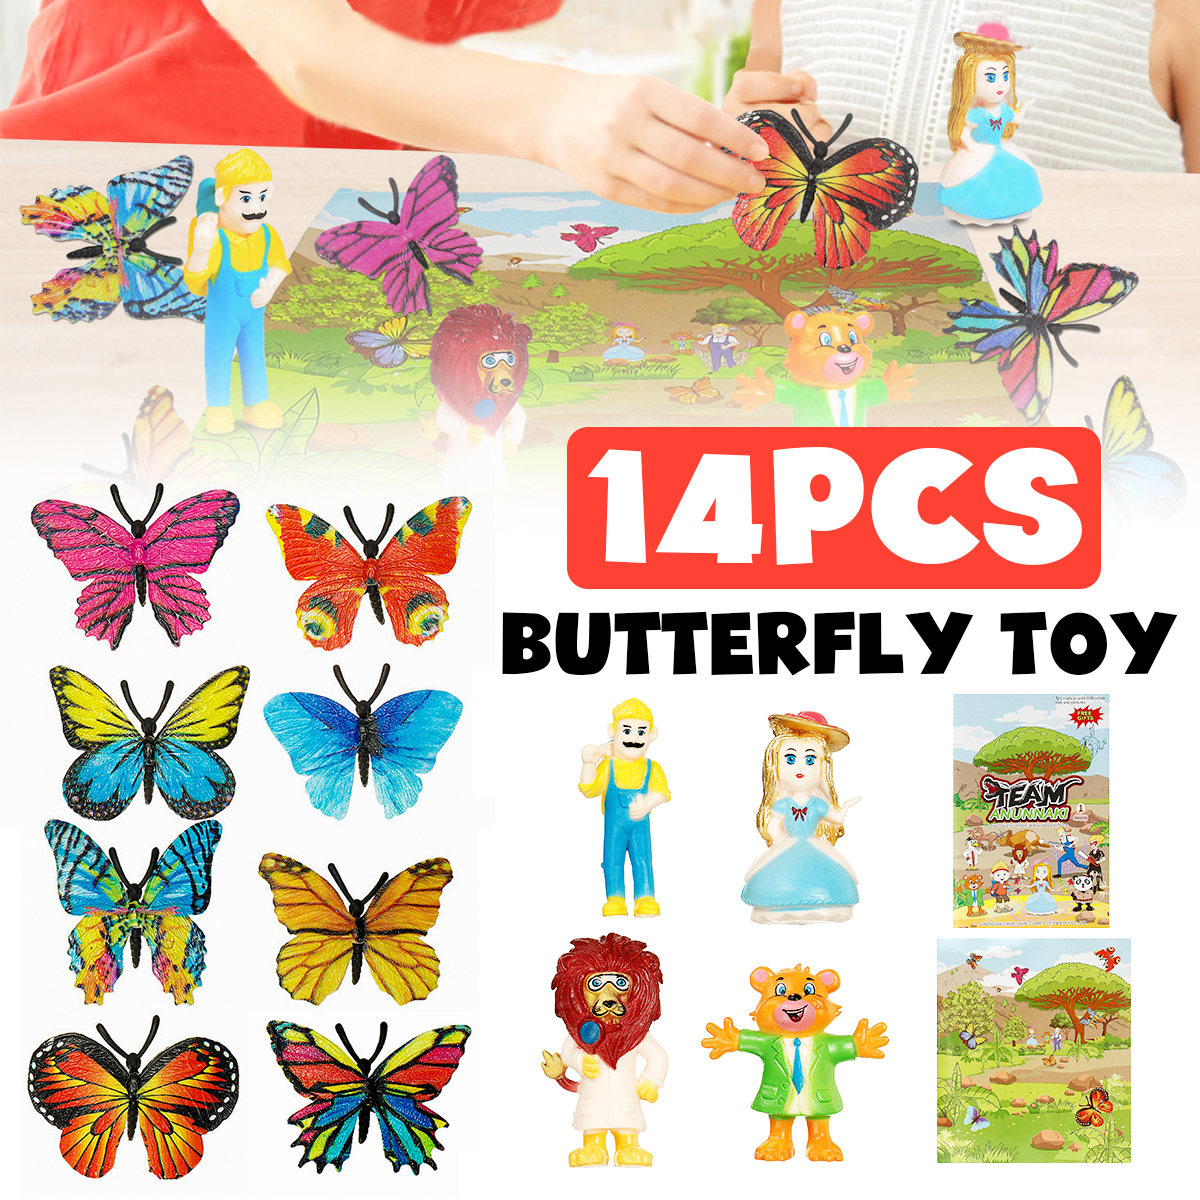 14-Pcs-High-Simulation-Colorful-Realistic-Insects-Butterfly-Animal-Figure-Doll-Model-Learning-Educat-1851298-1